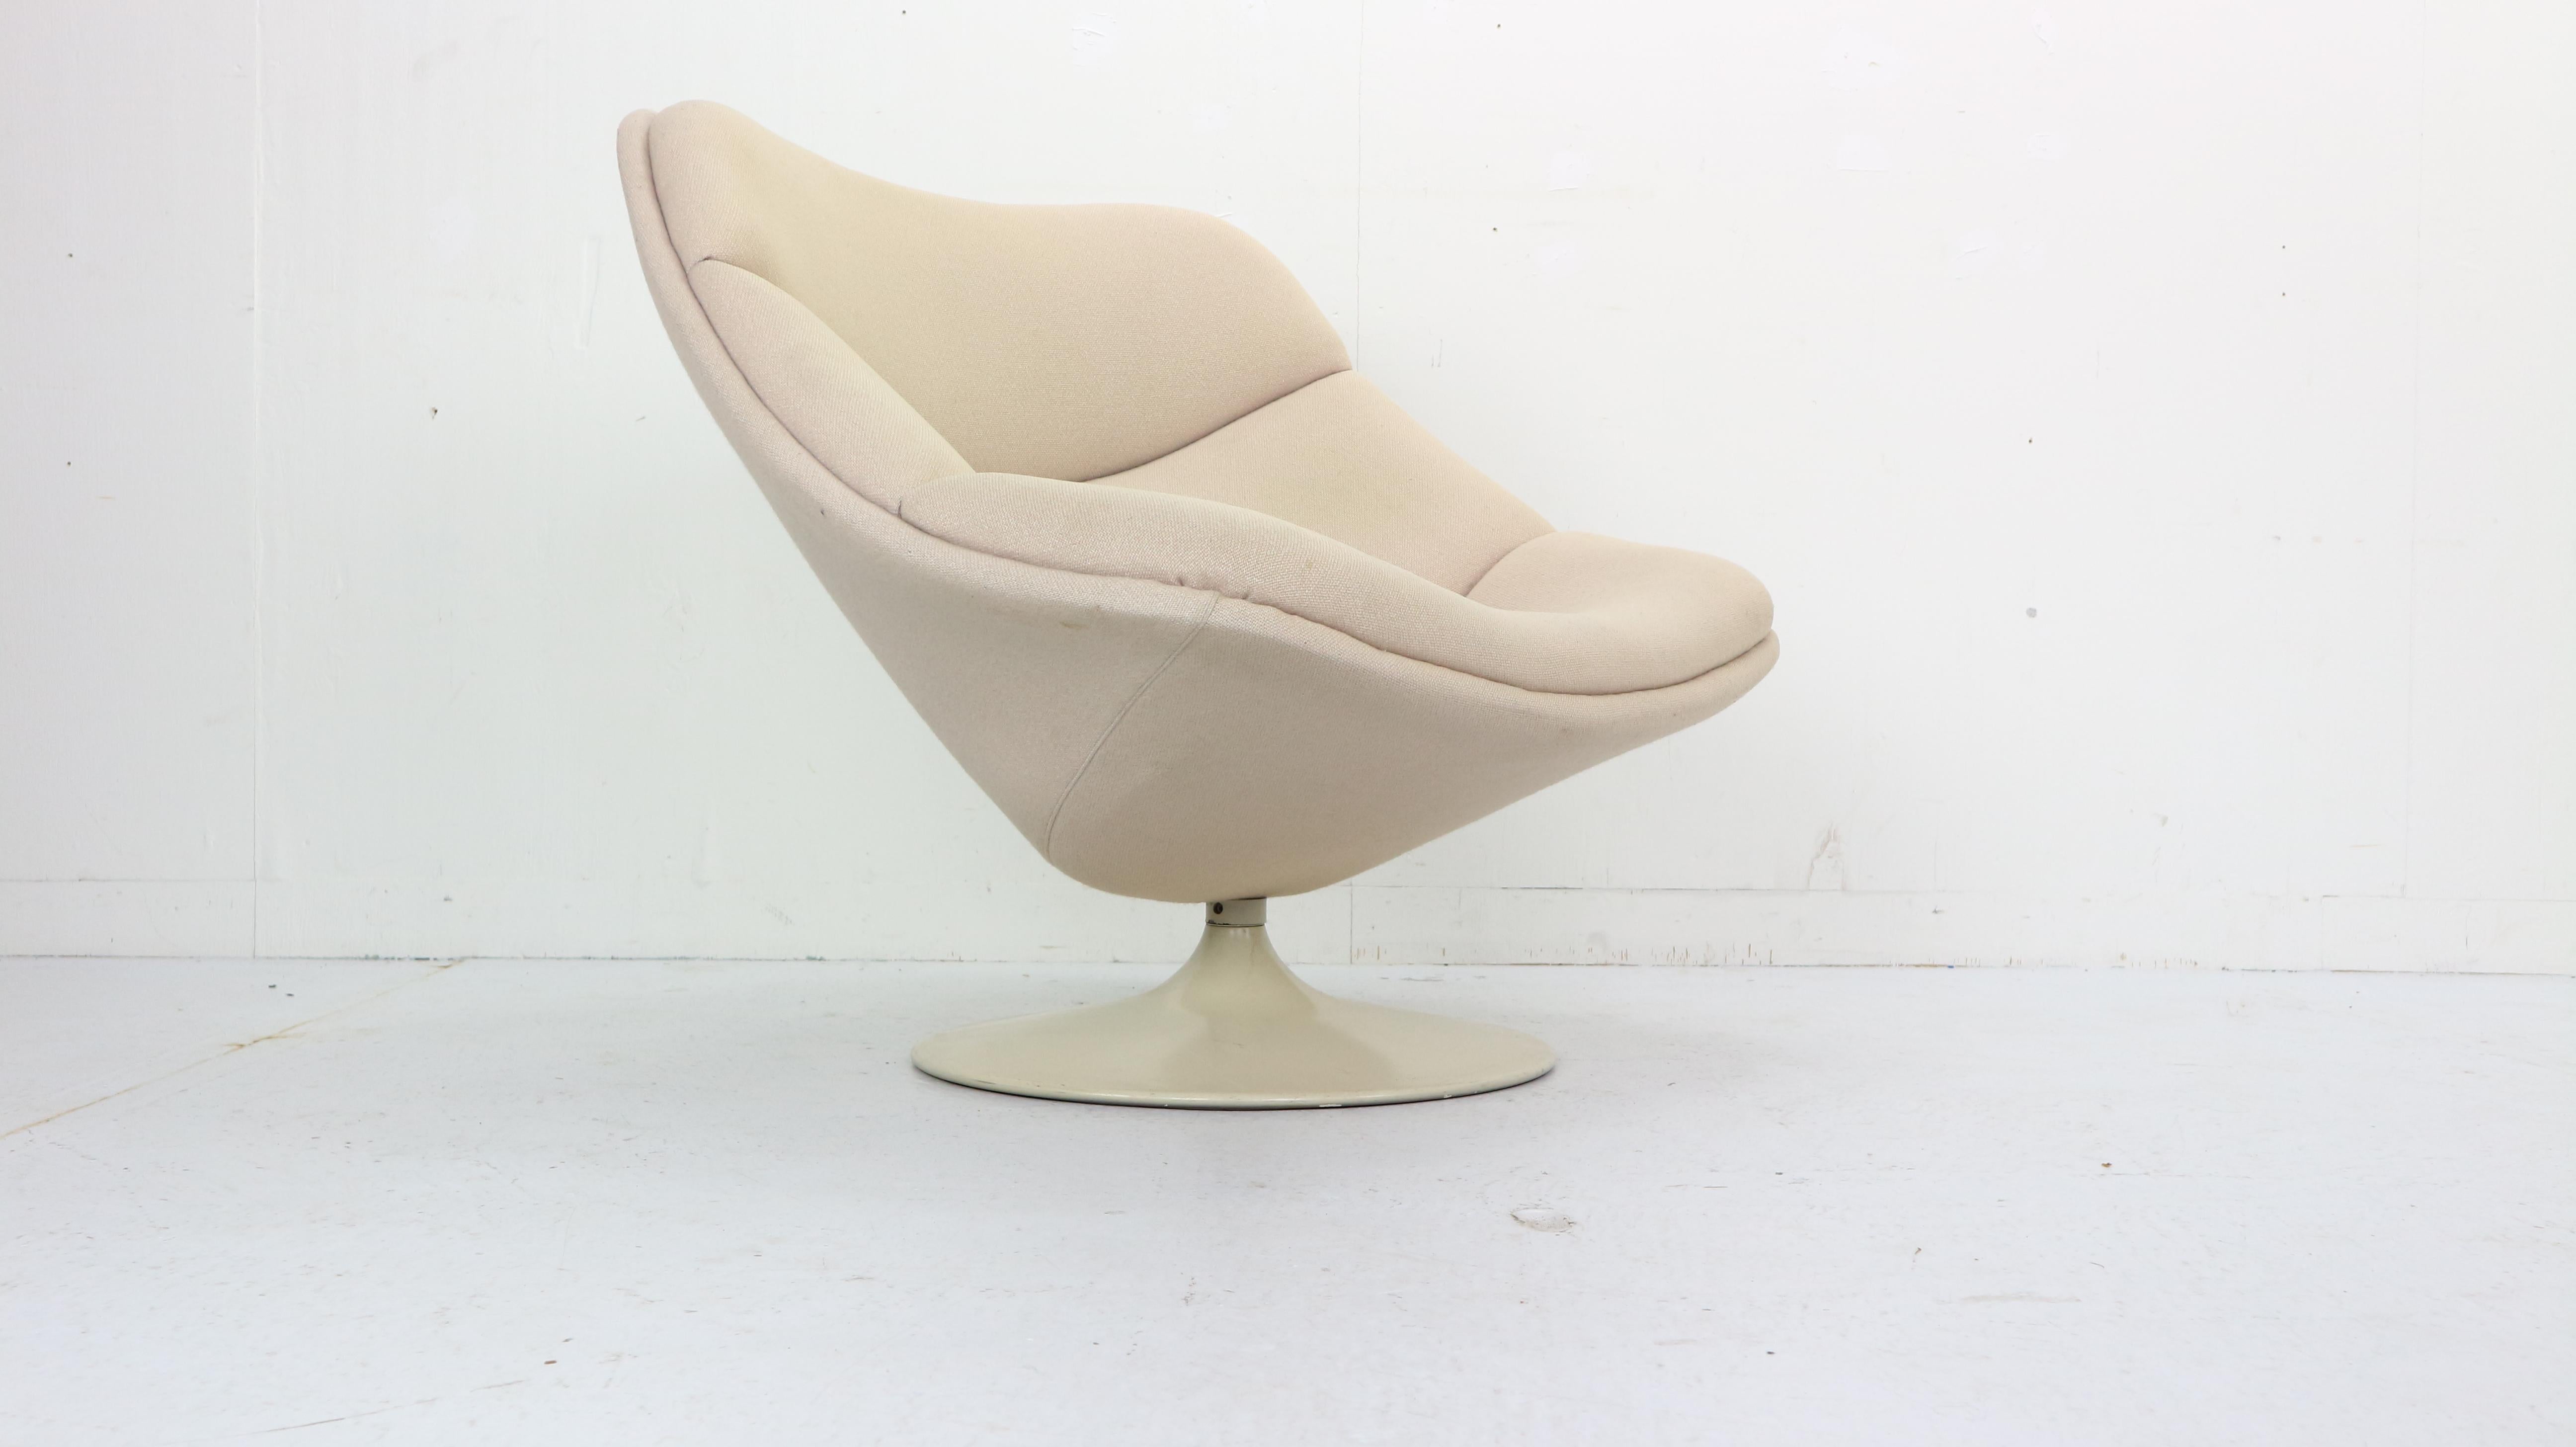 This lounge chair was designed by Pierre Paulin in 1961 for Artifort manufacture fabric, Netherlands. 
Model number- F557.
It's the first edition of the Oyster Chair and was produced until 1965, making it rare and unique vintage furniture